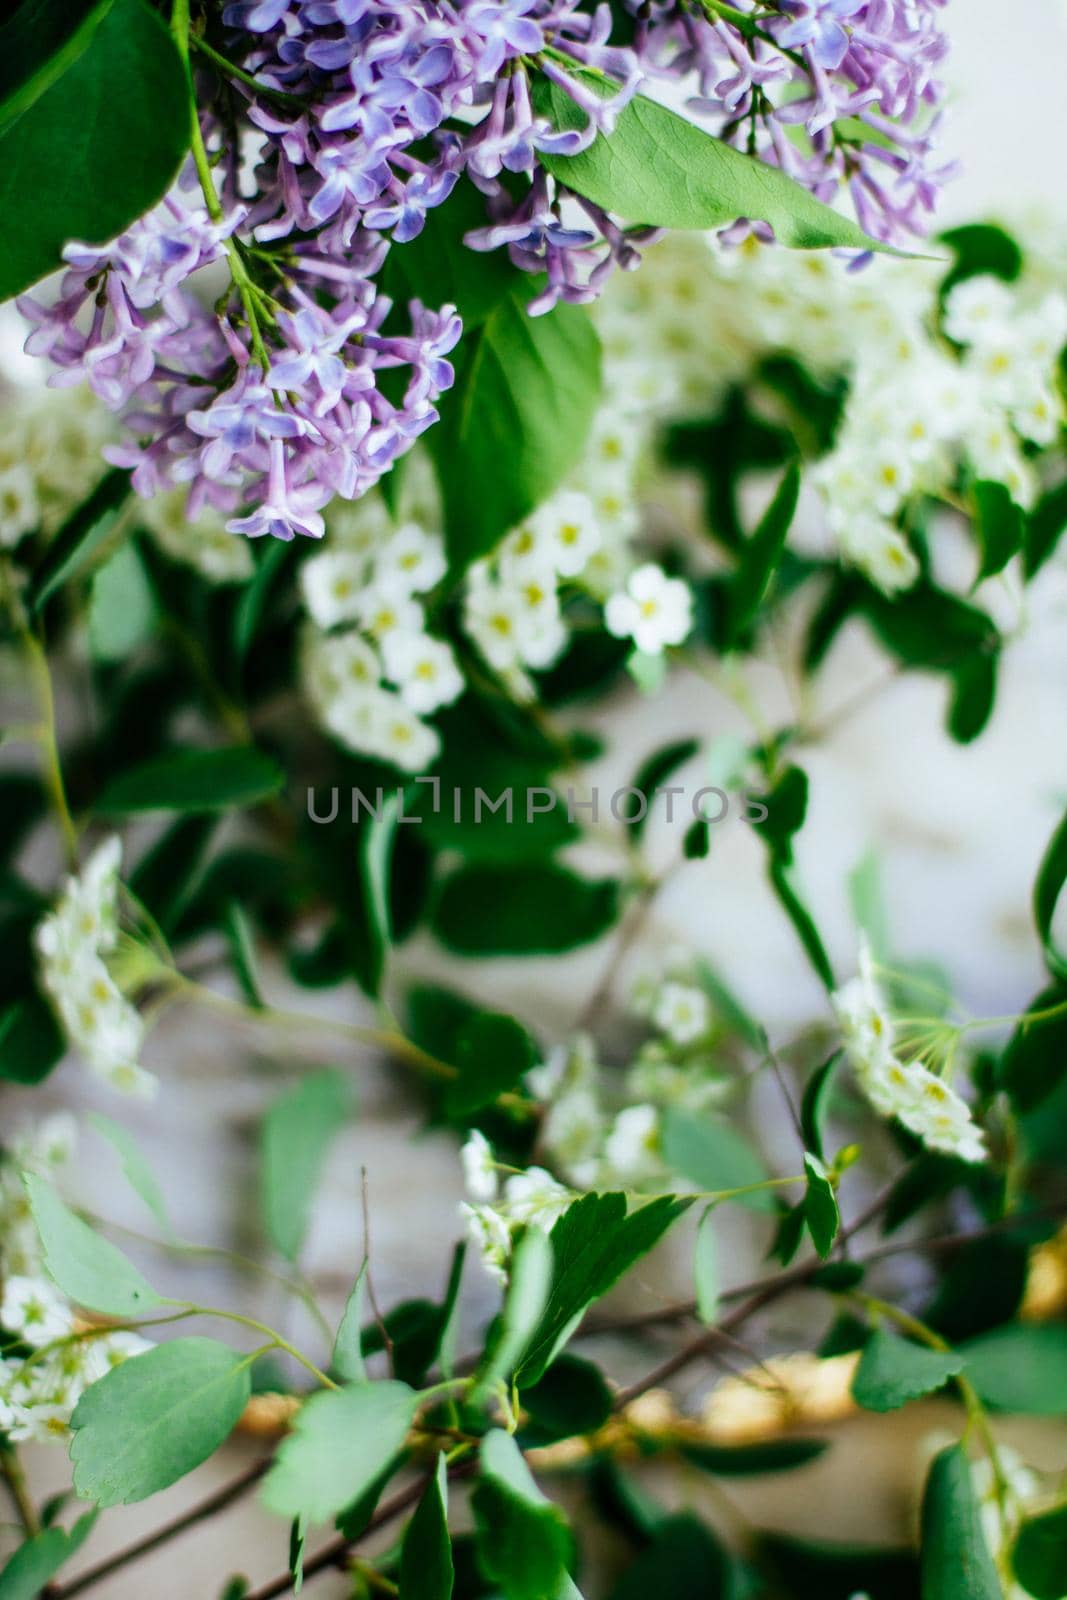 floral blossom - wedding, holiday and flower garden styled concept, elegant visuals